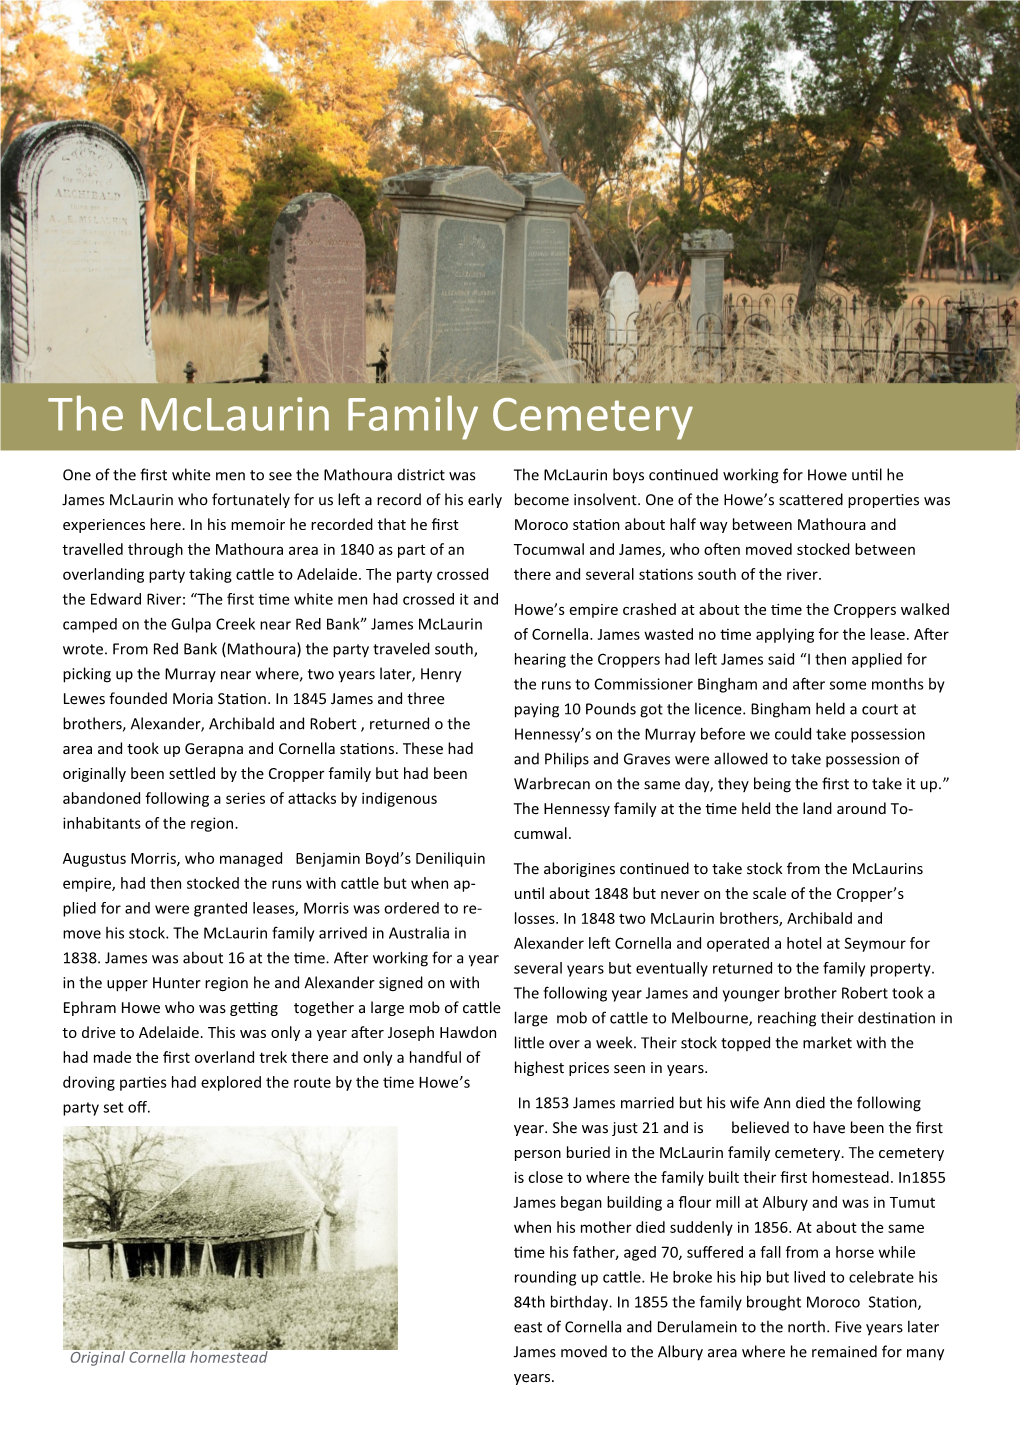 The Mclaurin Family Cemetery